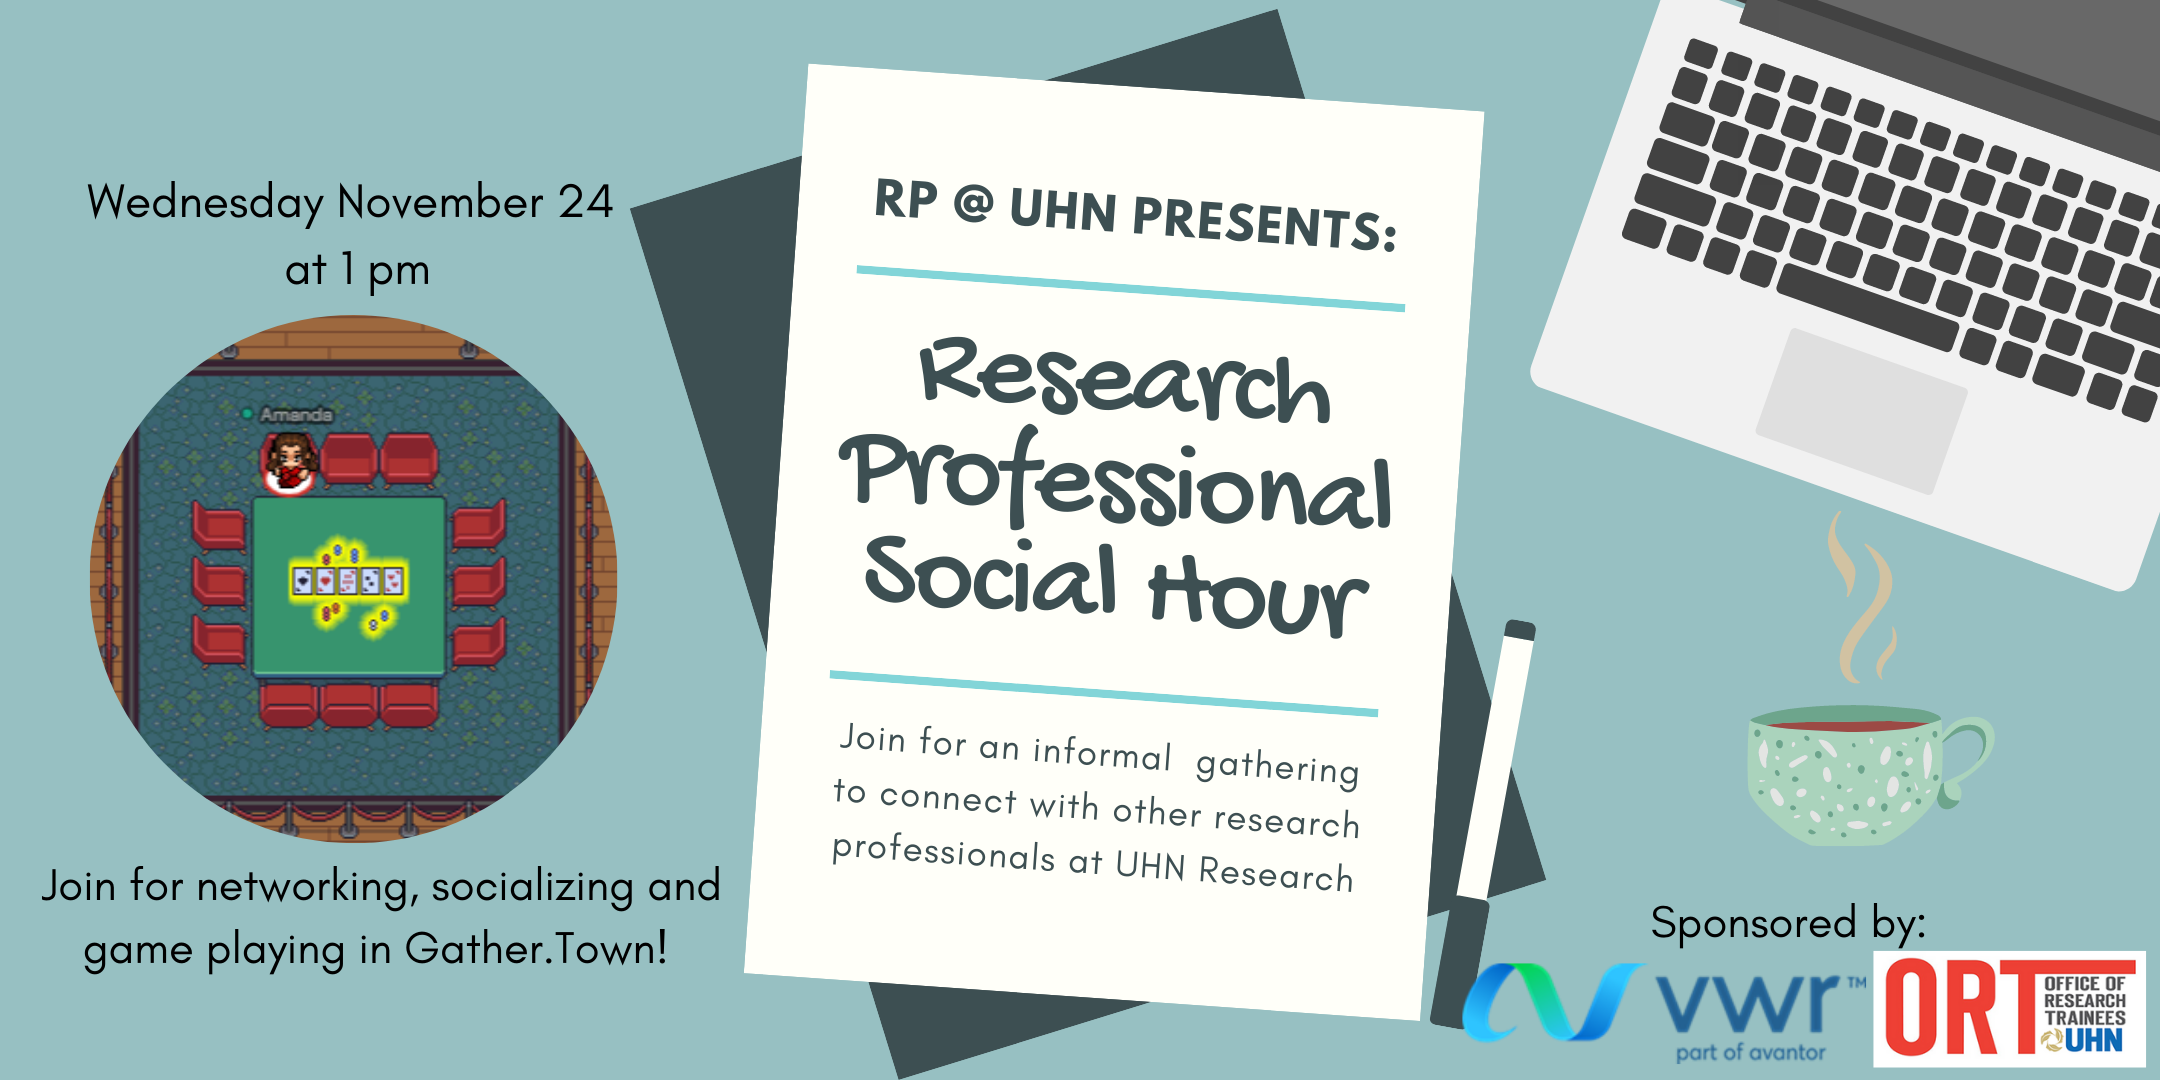 A poster for the Research Professional Social Hour event featuring a Gather.Town image on the left and laptop on the right. Text on the poster states that it will be Nov. 24 at 1 pm and invites the RPs at UHN to join for an informal gathering to relax, network, and socialize over games together in Gather.Town.